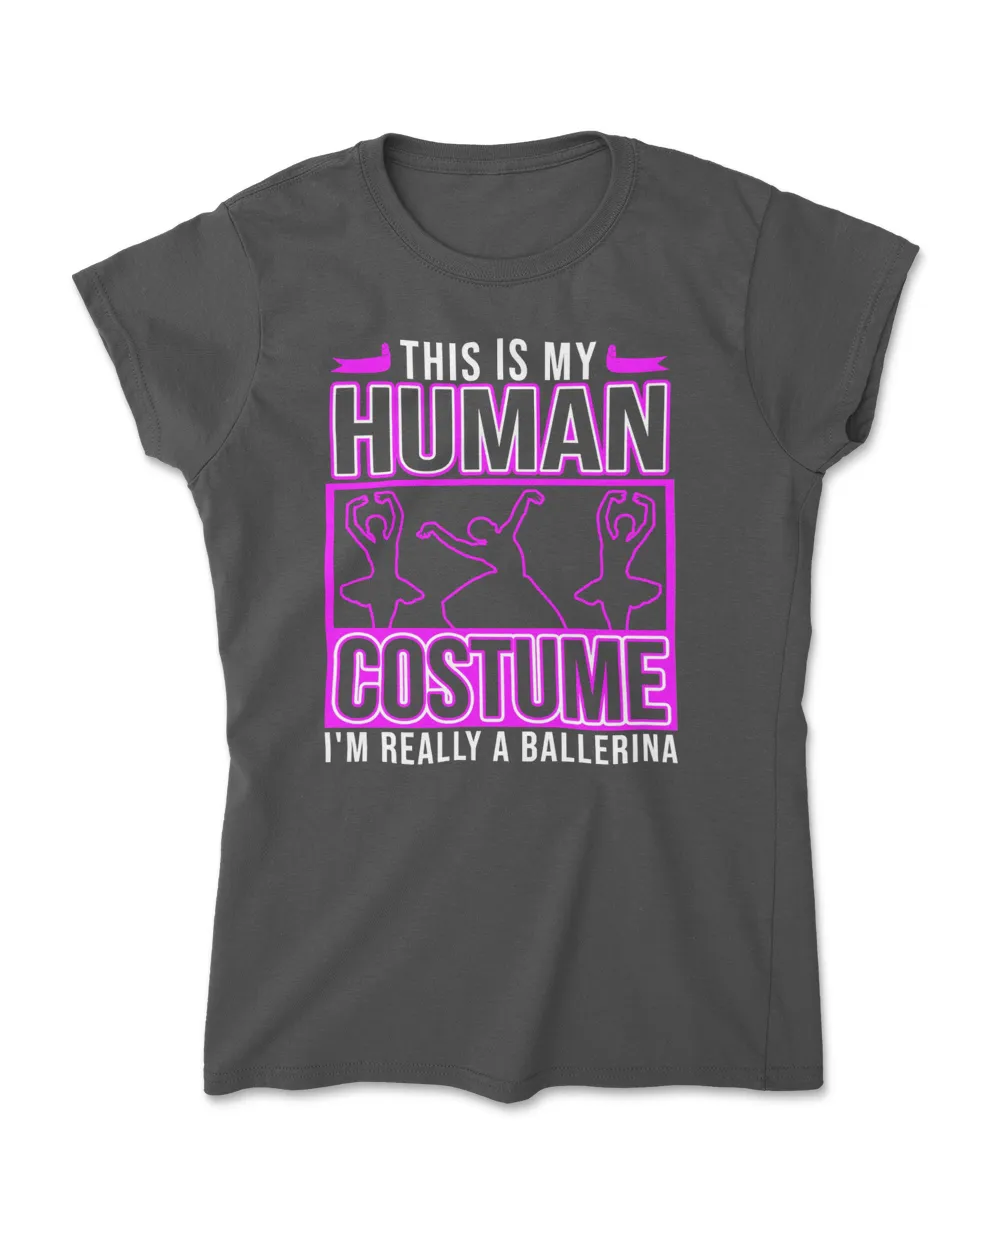 This Is My Human Costume Im Really A Ballerina 571 dance